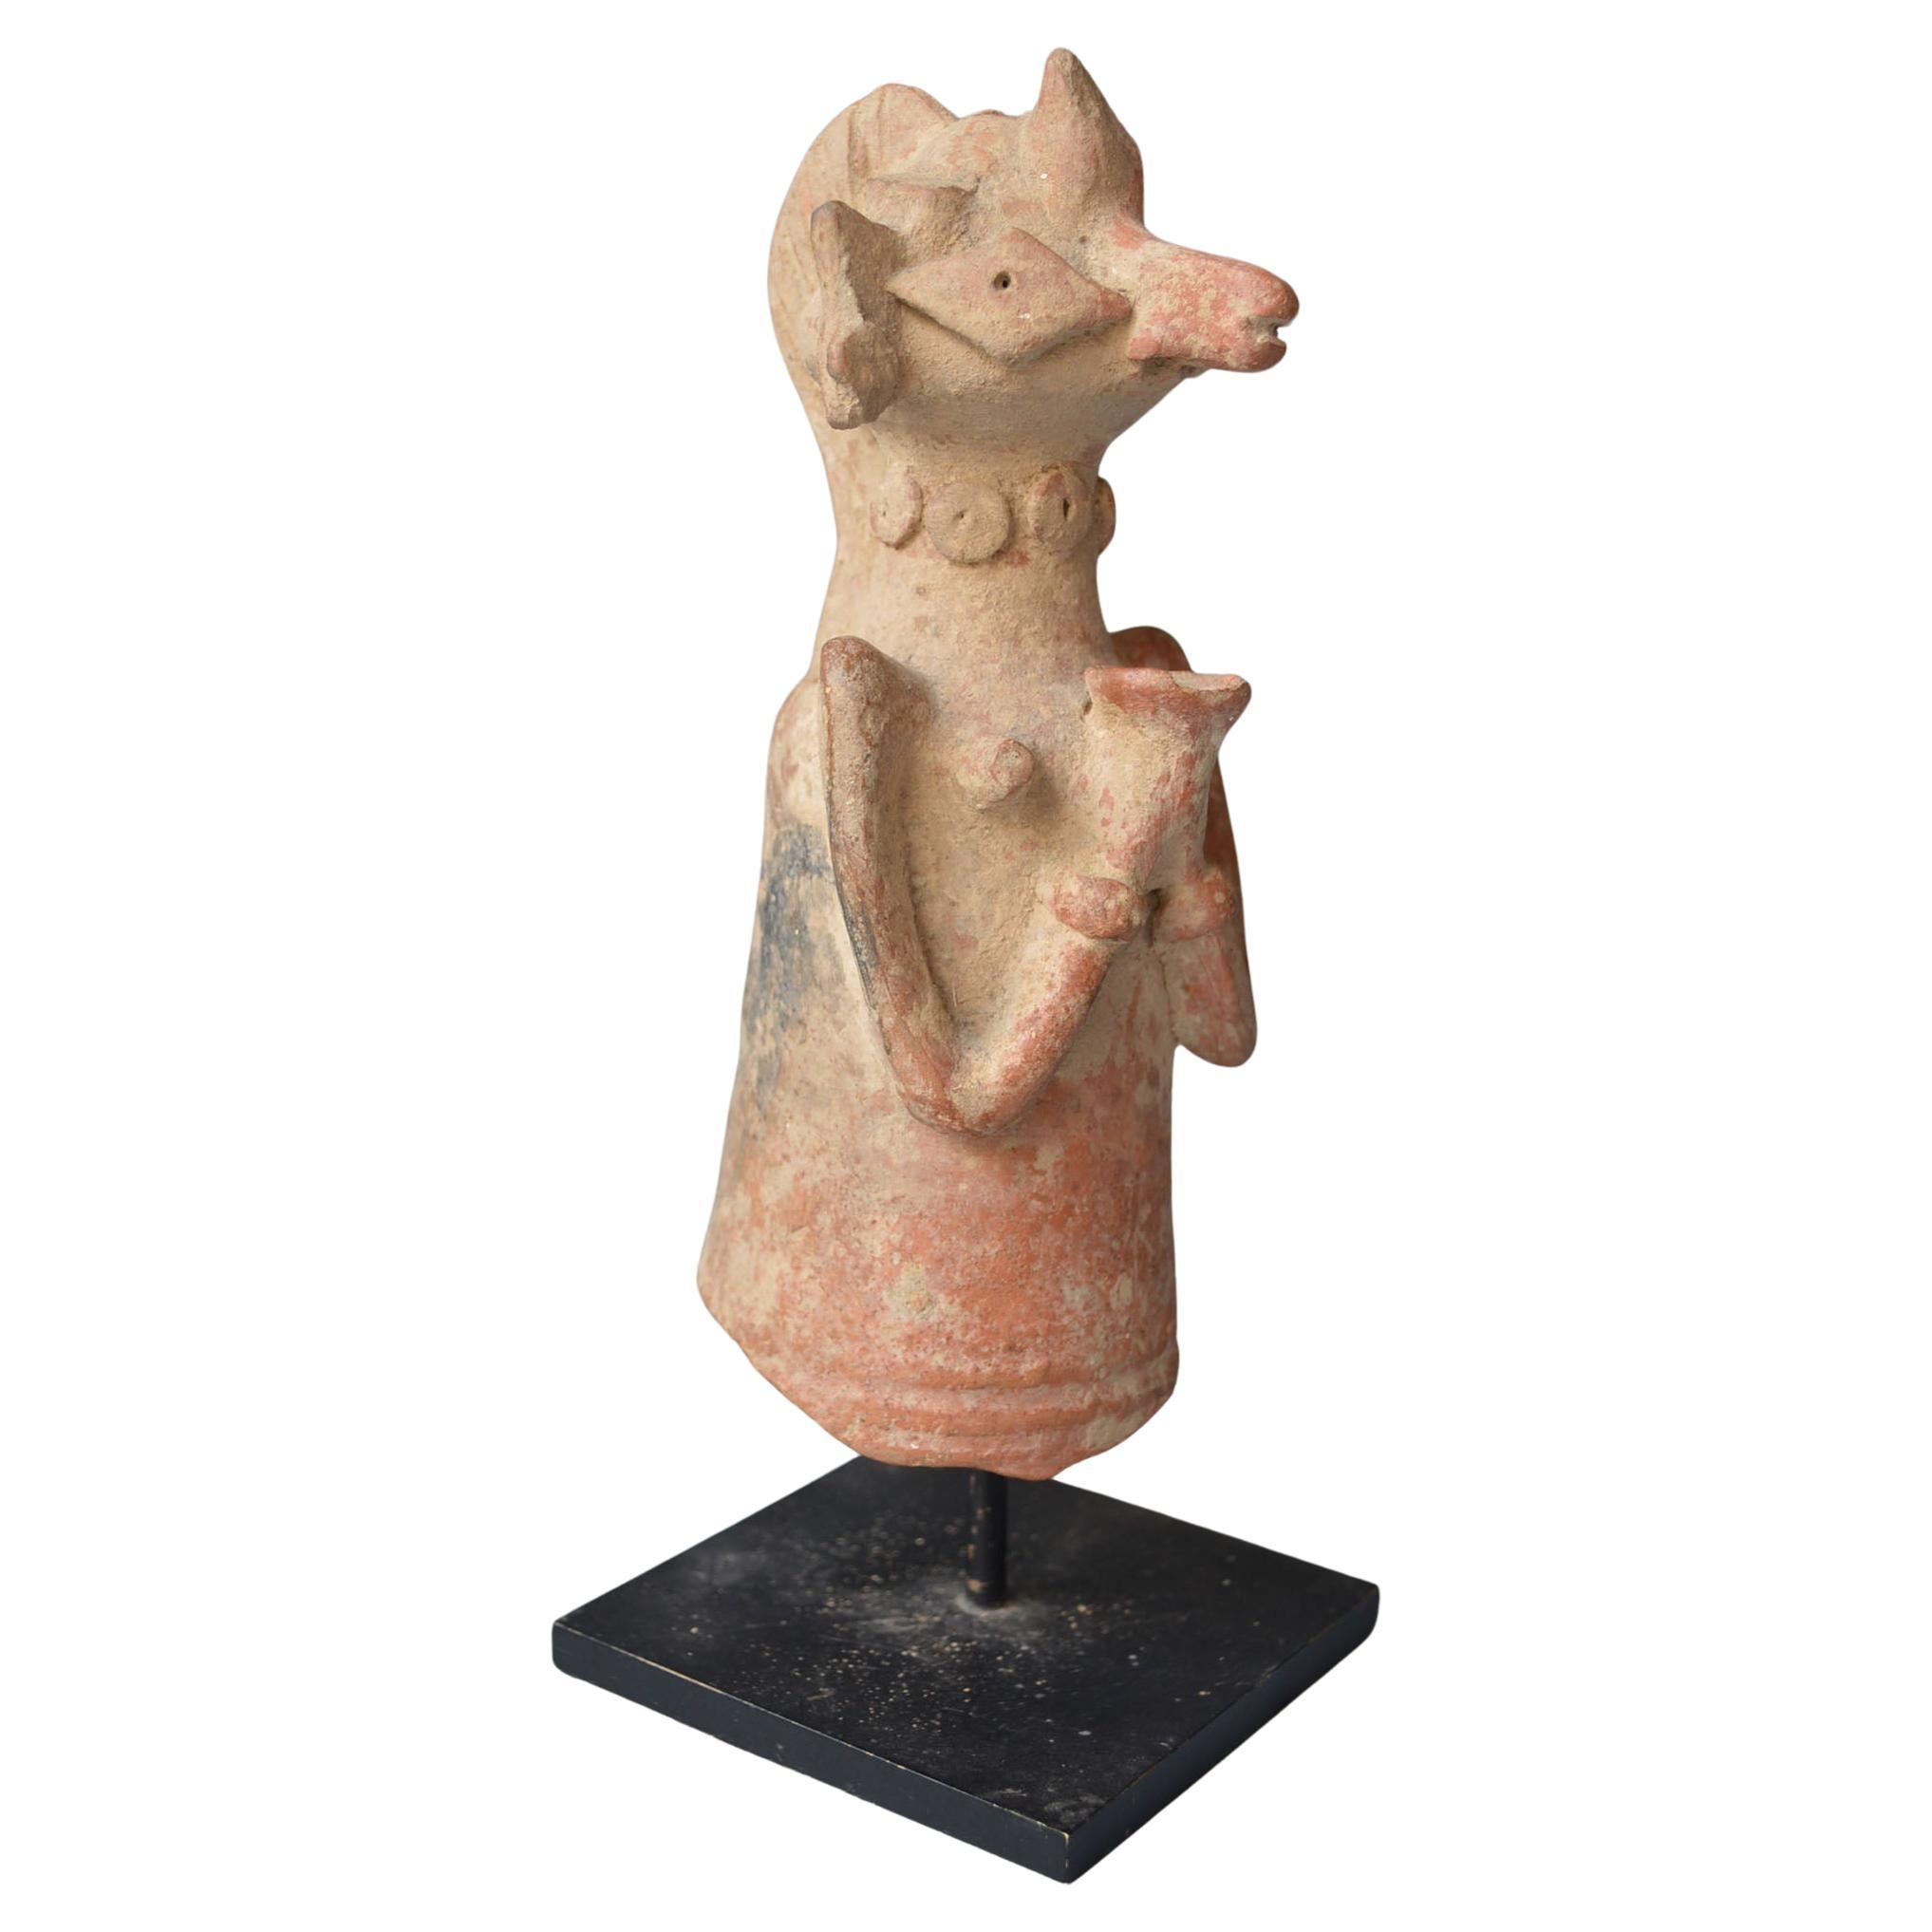 Ancient Indus Valley cup bearer Fertility figurine C (2800-2600 BC). For Sale